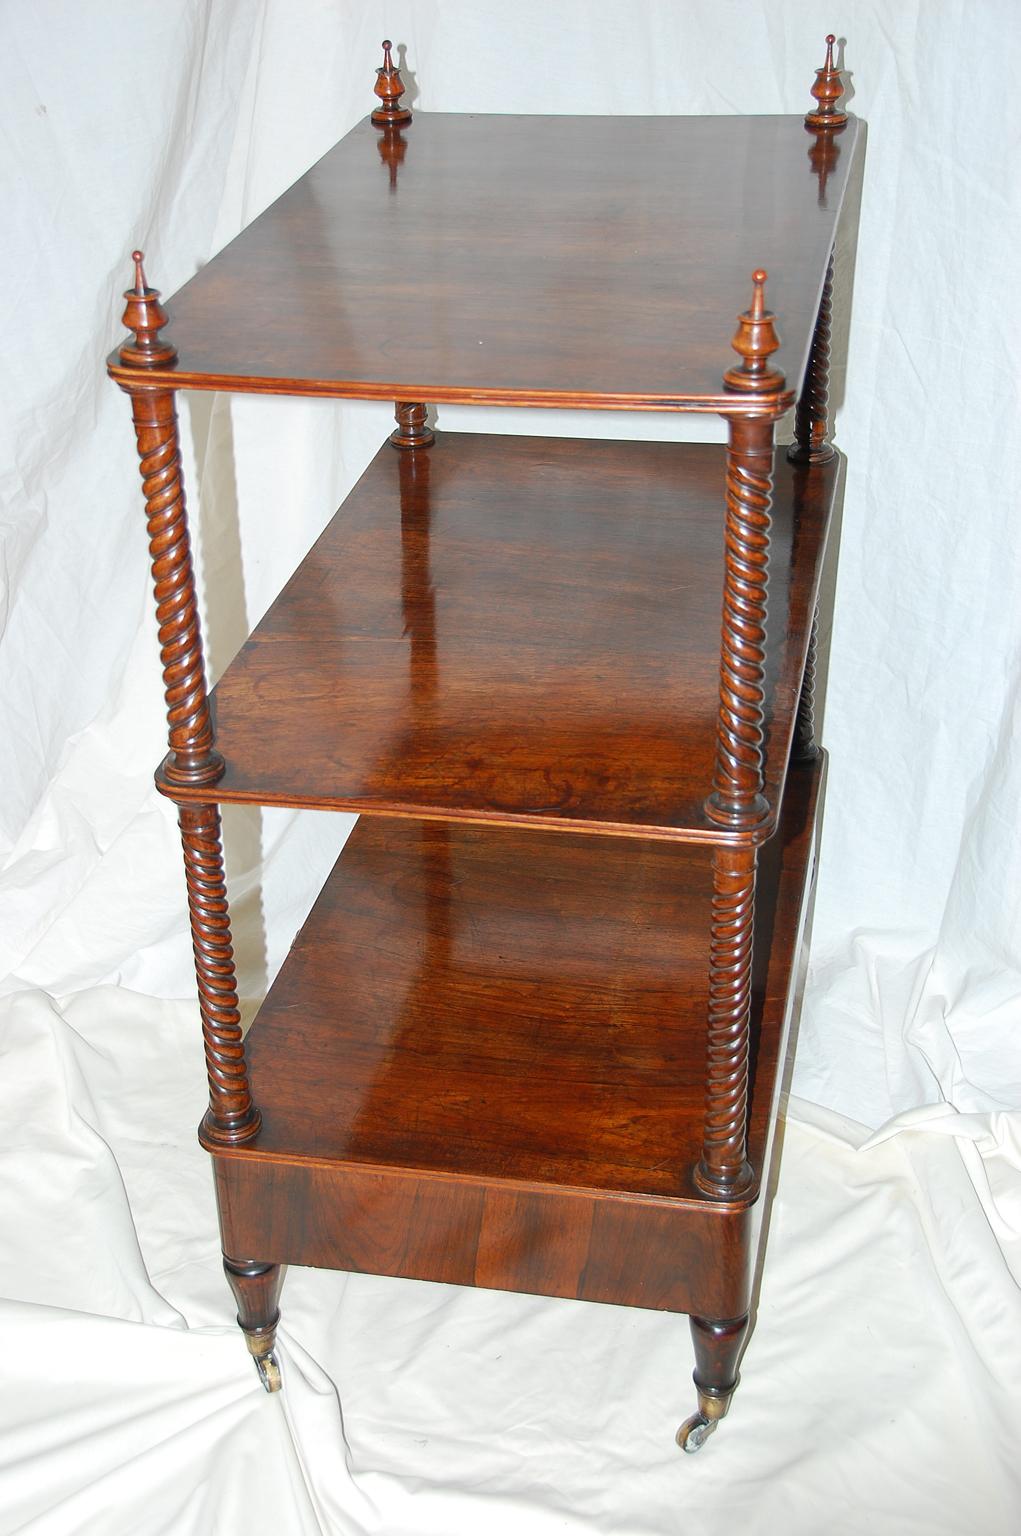 English Regency Period 19th Century Étagère, Rosewood, Three Tiers and a Drawer (18. Jahrhundert)